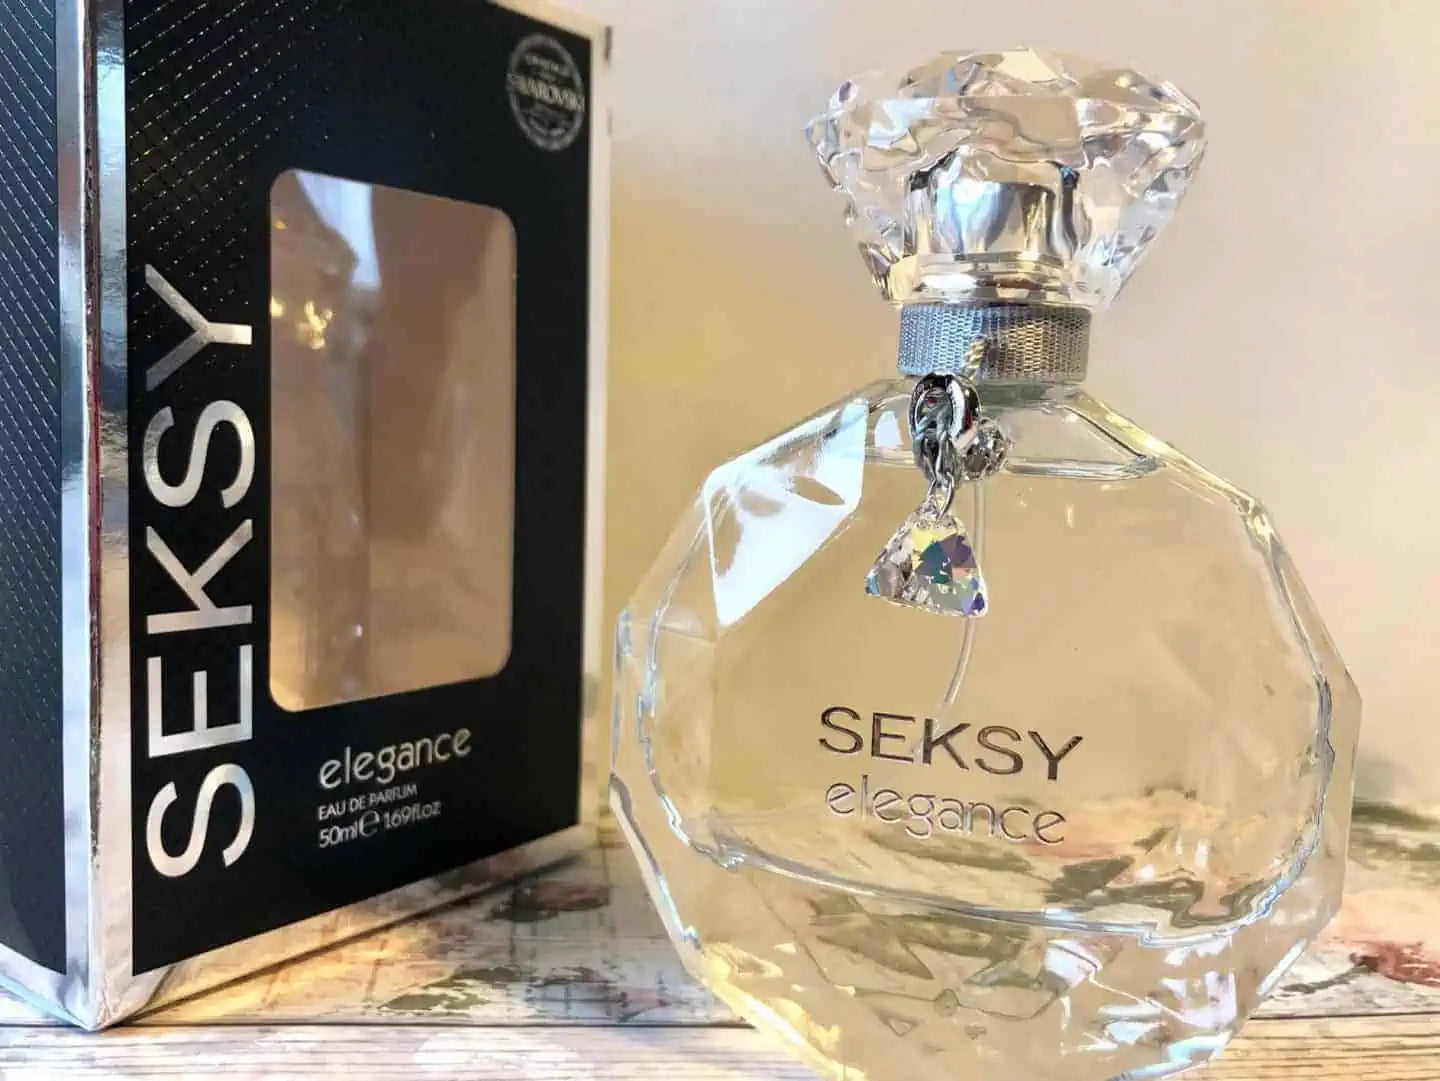 Seksy perfume collection available at THE PERFUME WORLD 